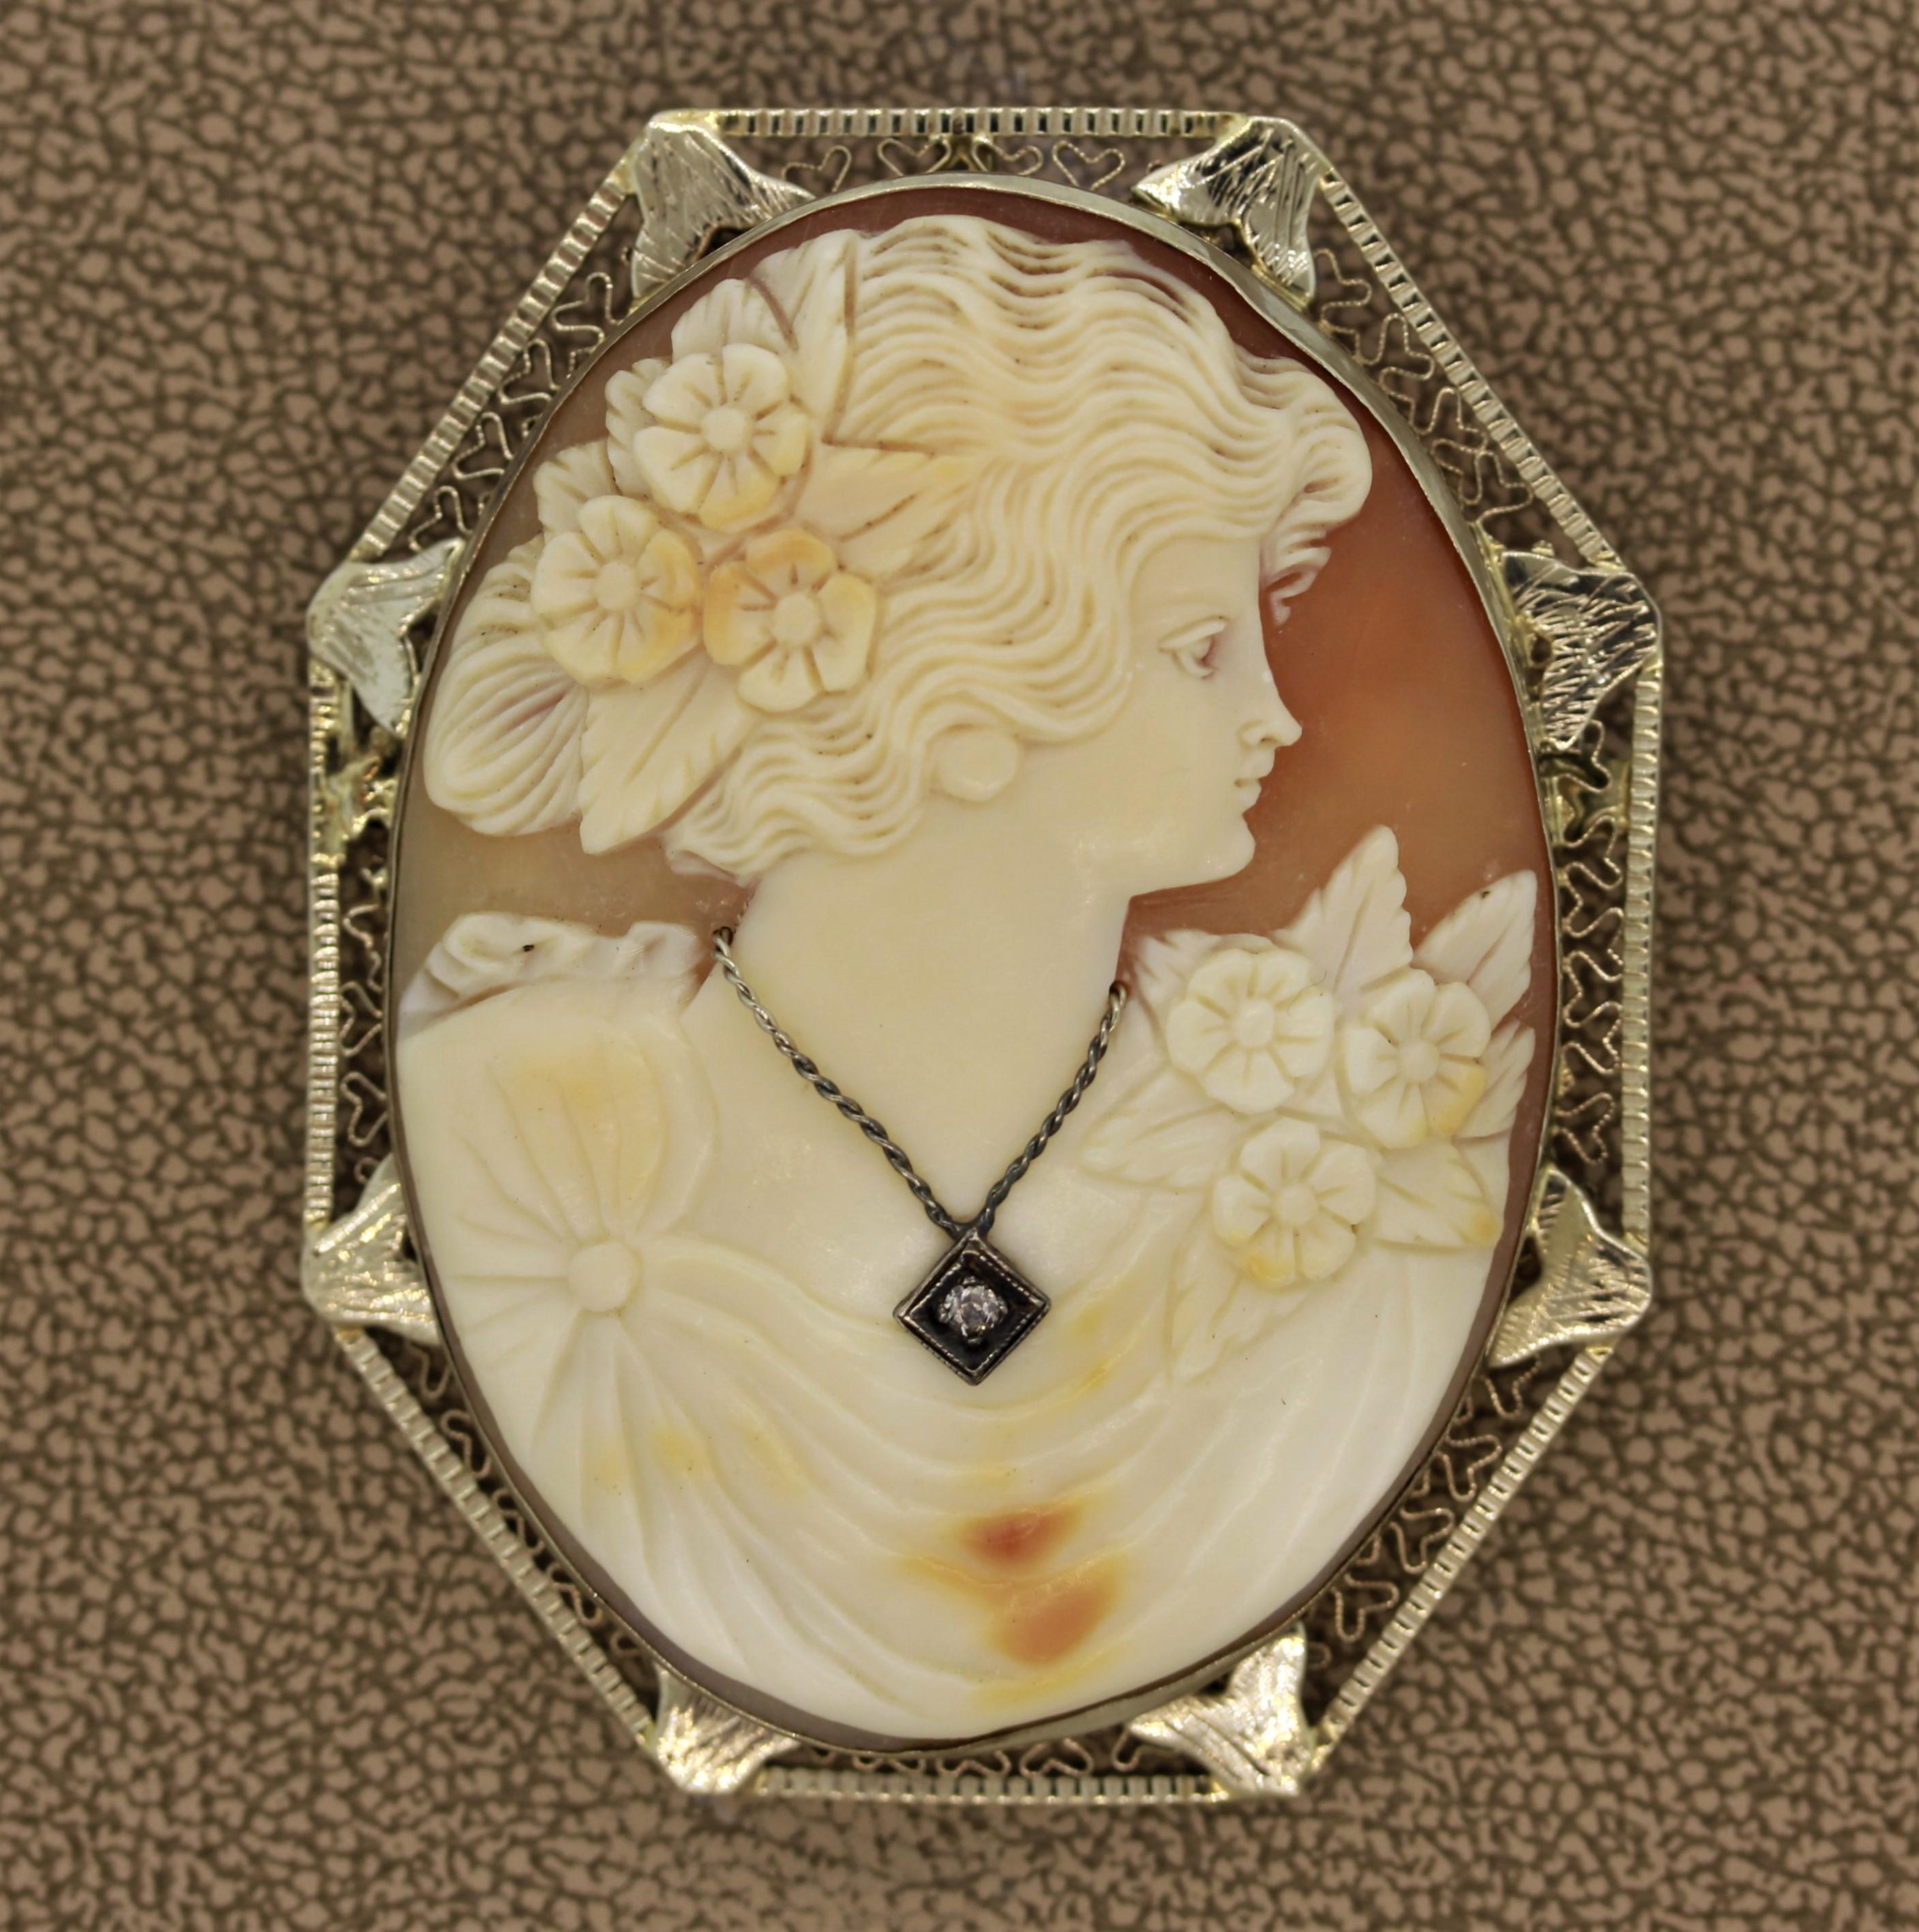 A large antique cameo depicting a noble woman dressed in a beautiful gown with flowers in her hair. She is wearing a necklace which has a round cut diamond set in it. The frame is made in 14k white gold. Can be worn as a brooch or pendant.

Length: